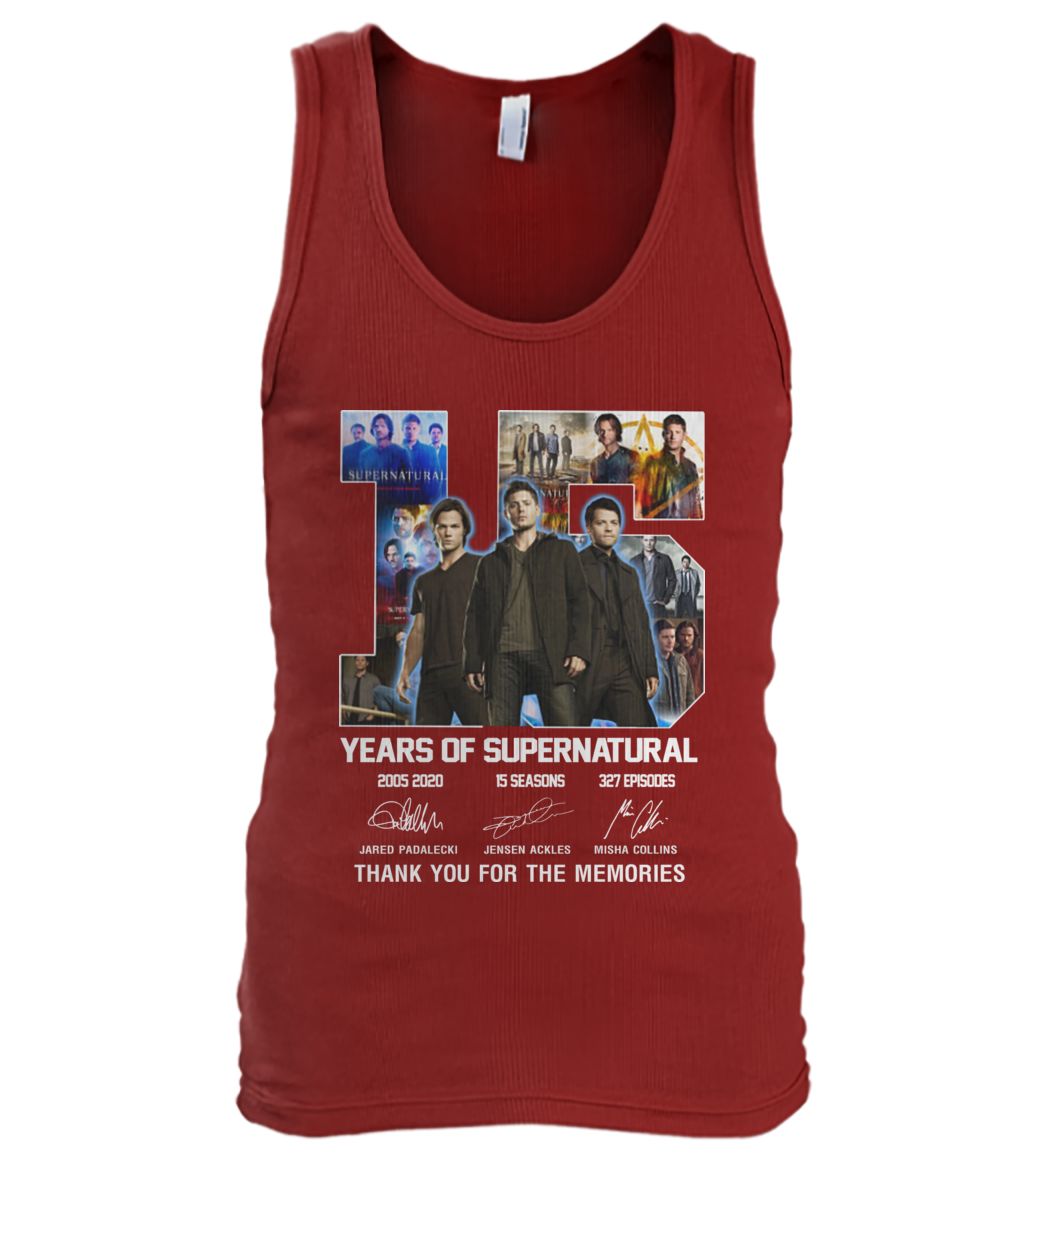 15 year of supernatural thank you for the memories men's tank top